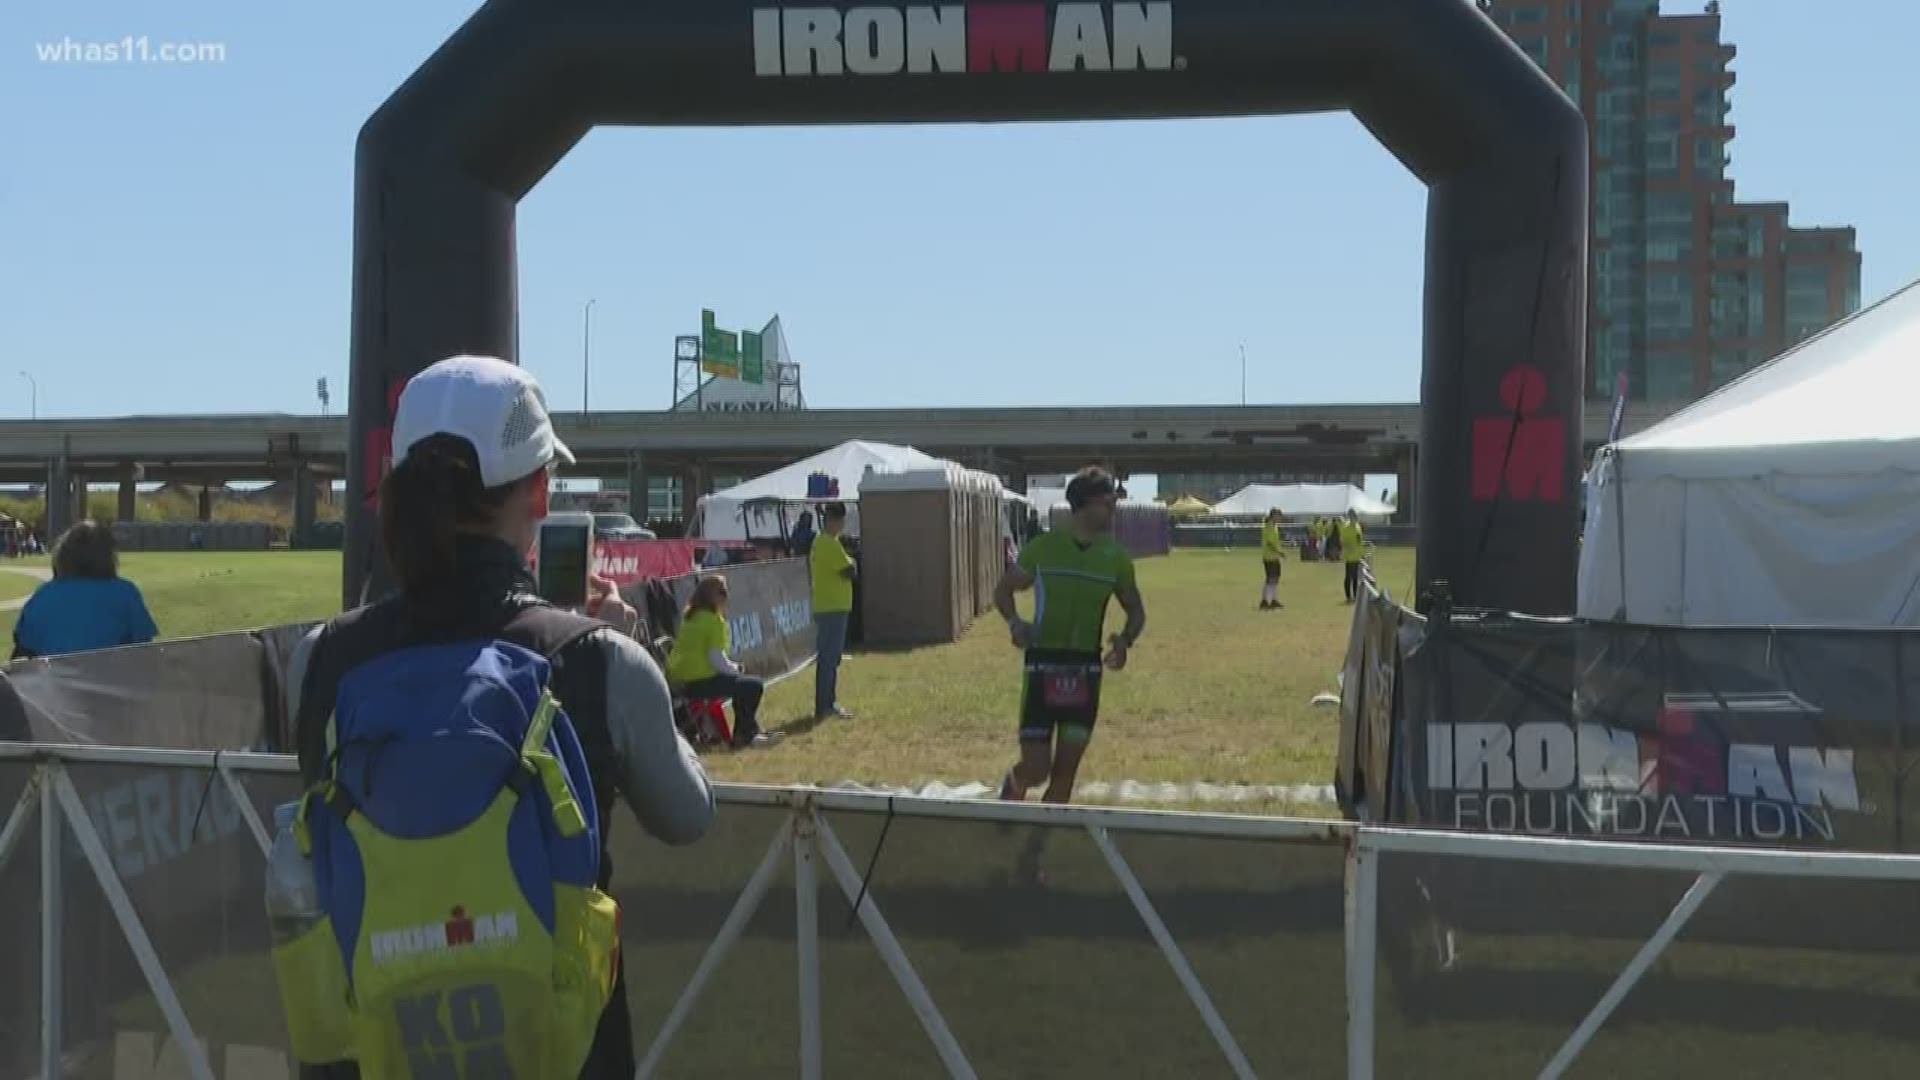 Despite the swimming portion being canceled due to an algae bloom in the Ohio River, thousands participated in IronMan Louisville